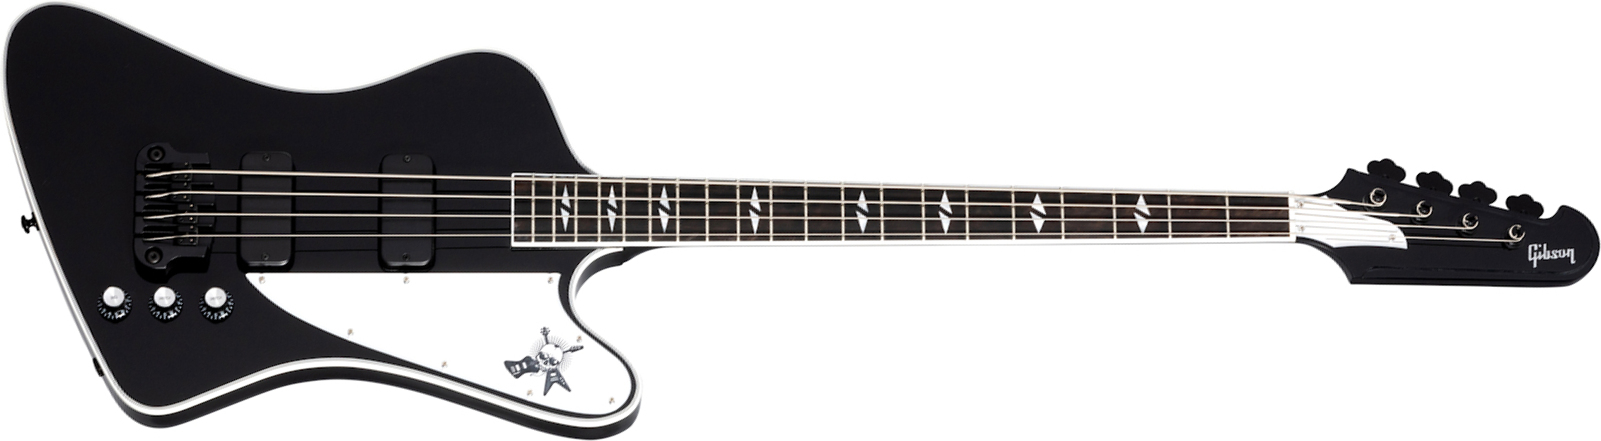 Gibson Gene Simmons Thunderbird G2 Signature Eb - Ebony - Basse Électrique Solid Body - Main picture